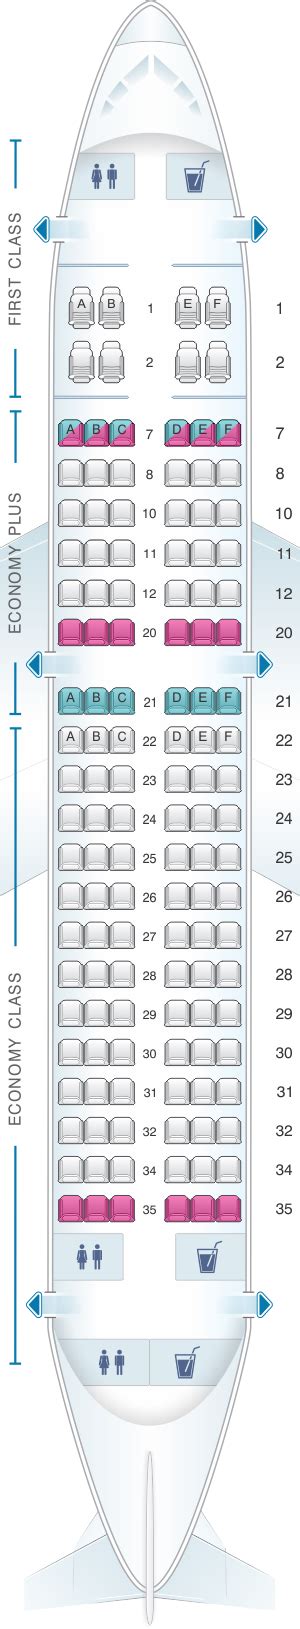 Frontier Airlines A321 Seat Map